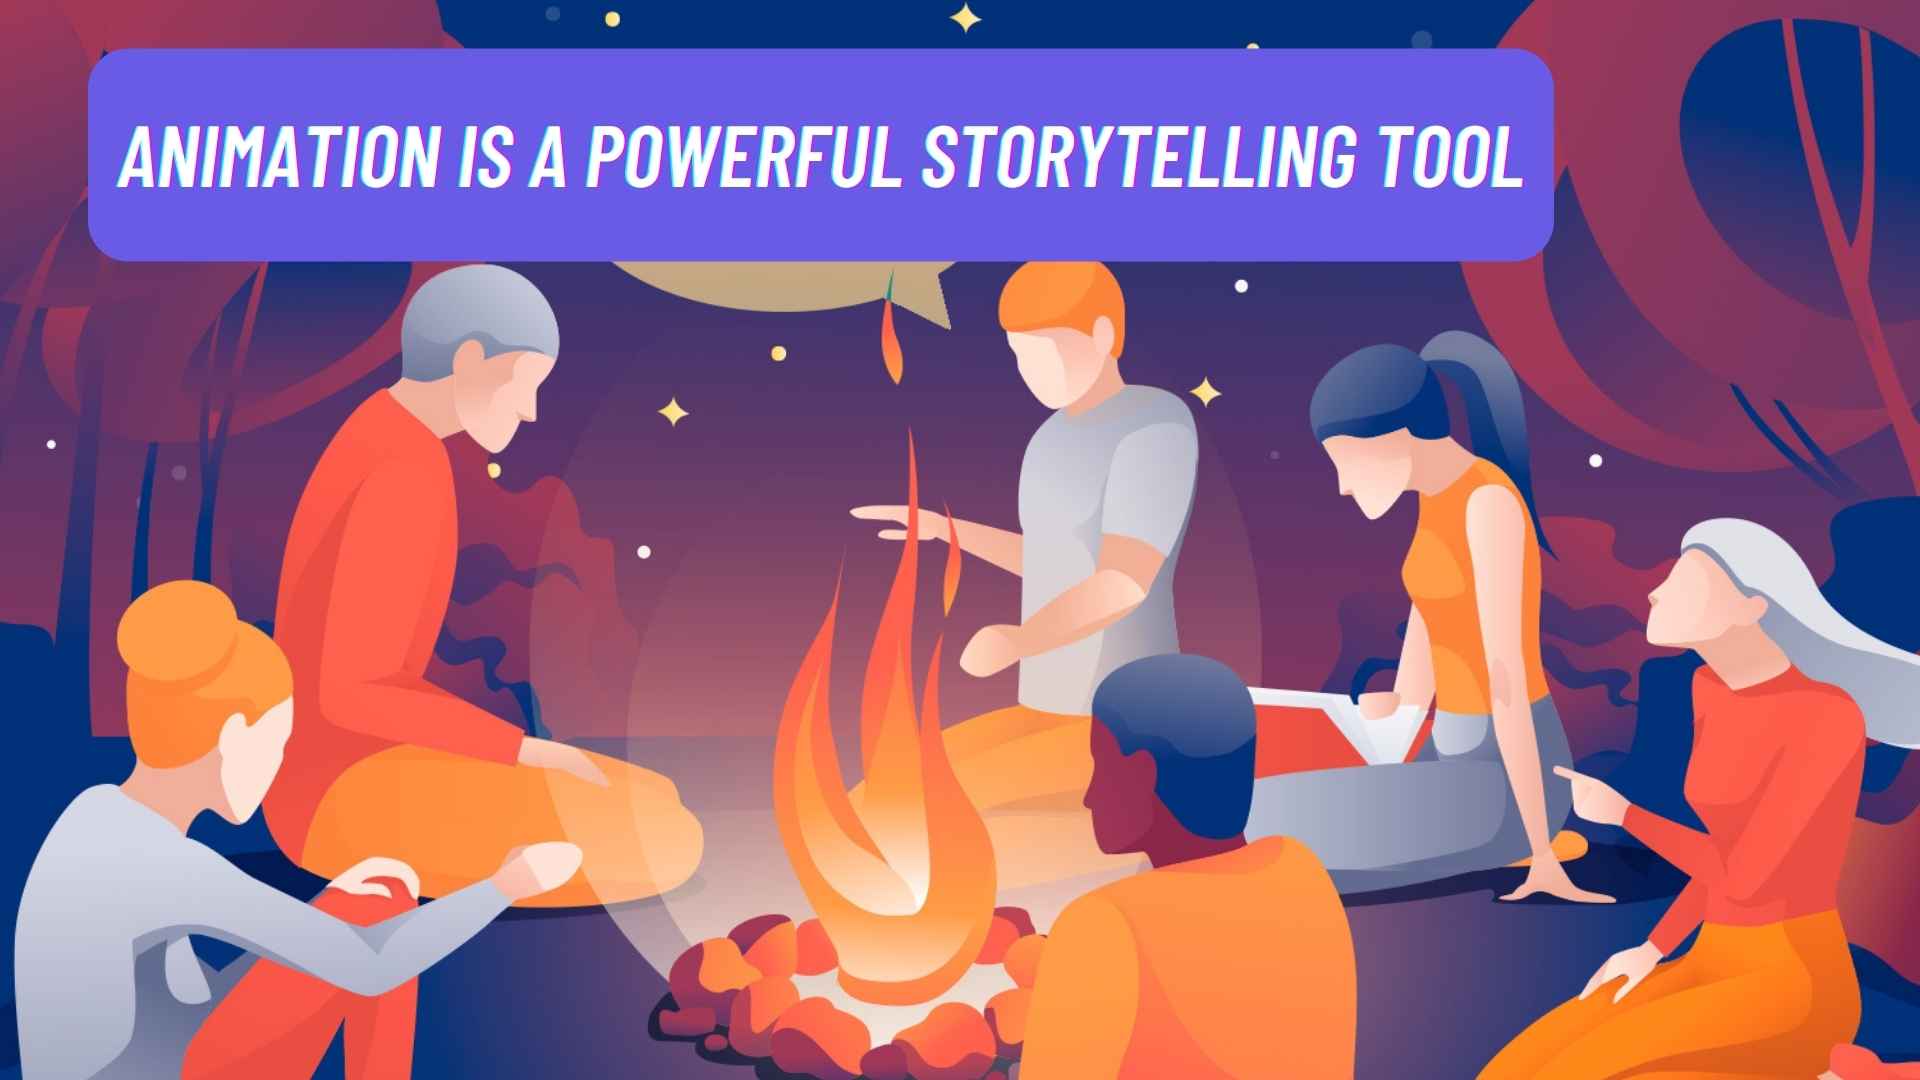 Storytelling by the fire - an article about storytelling with animation